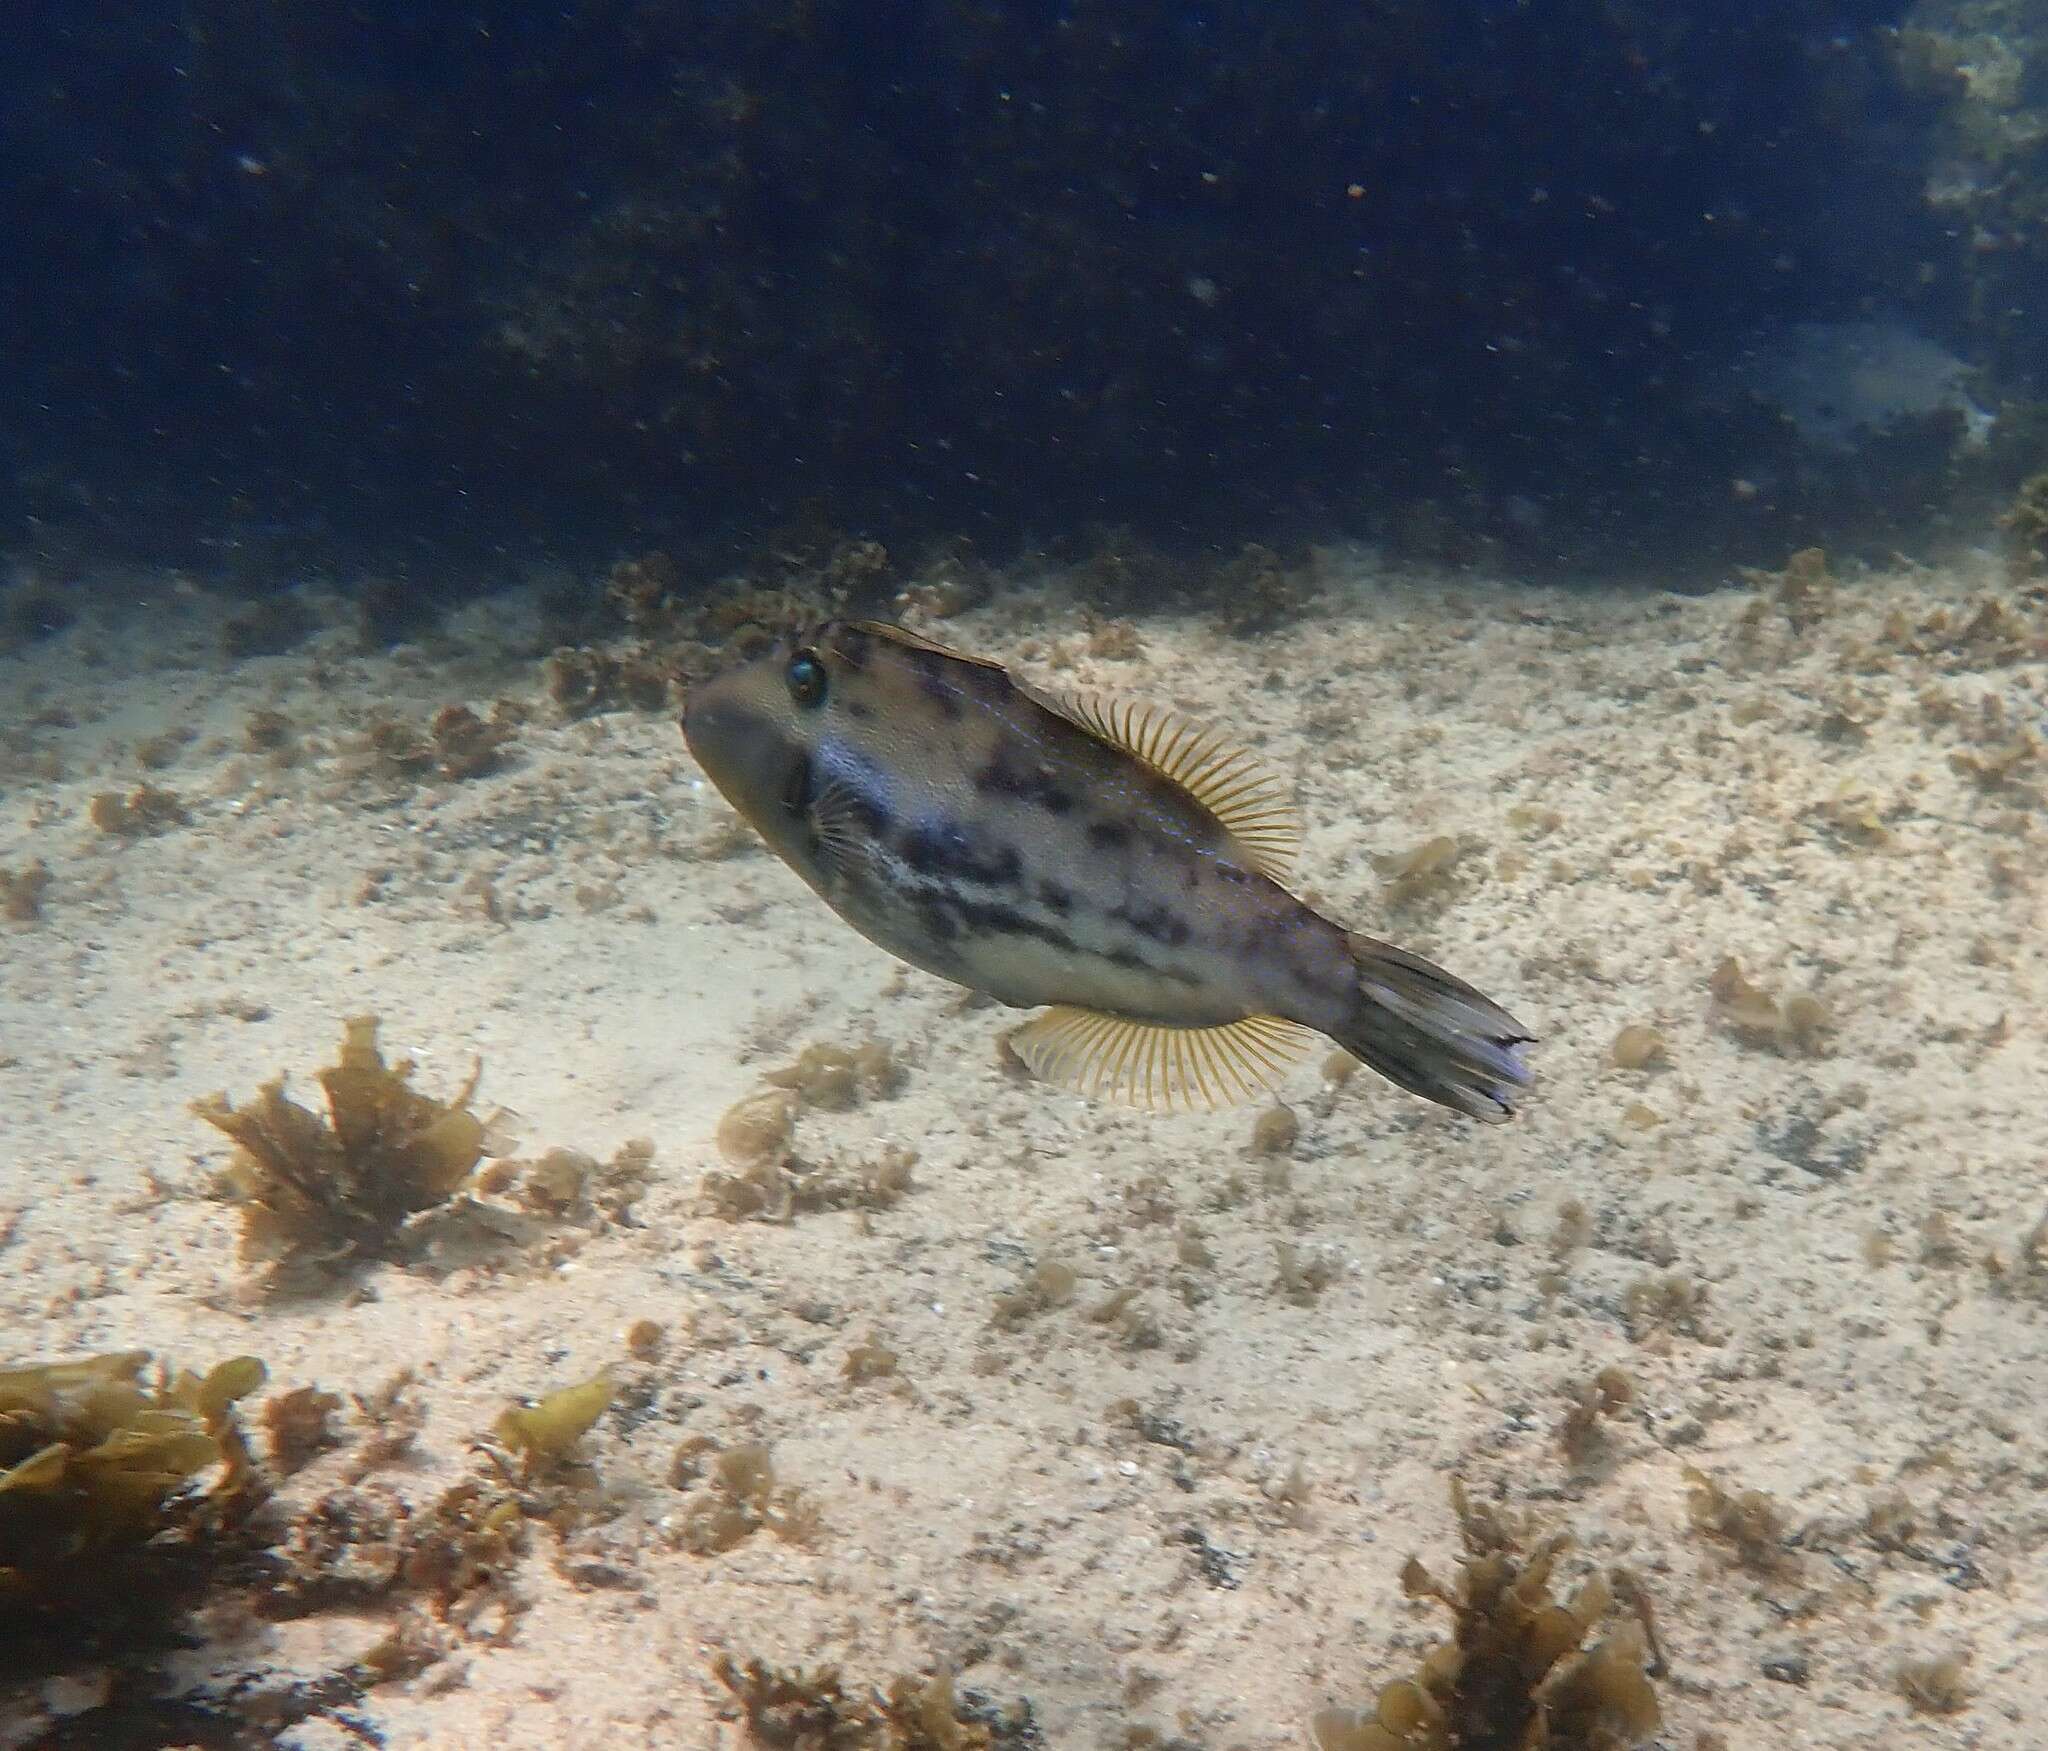 Image of Scobinichthys